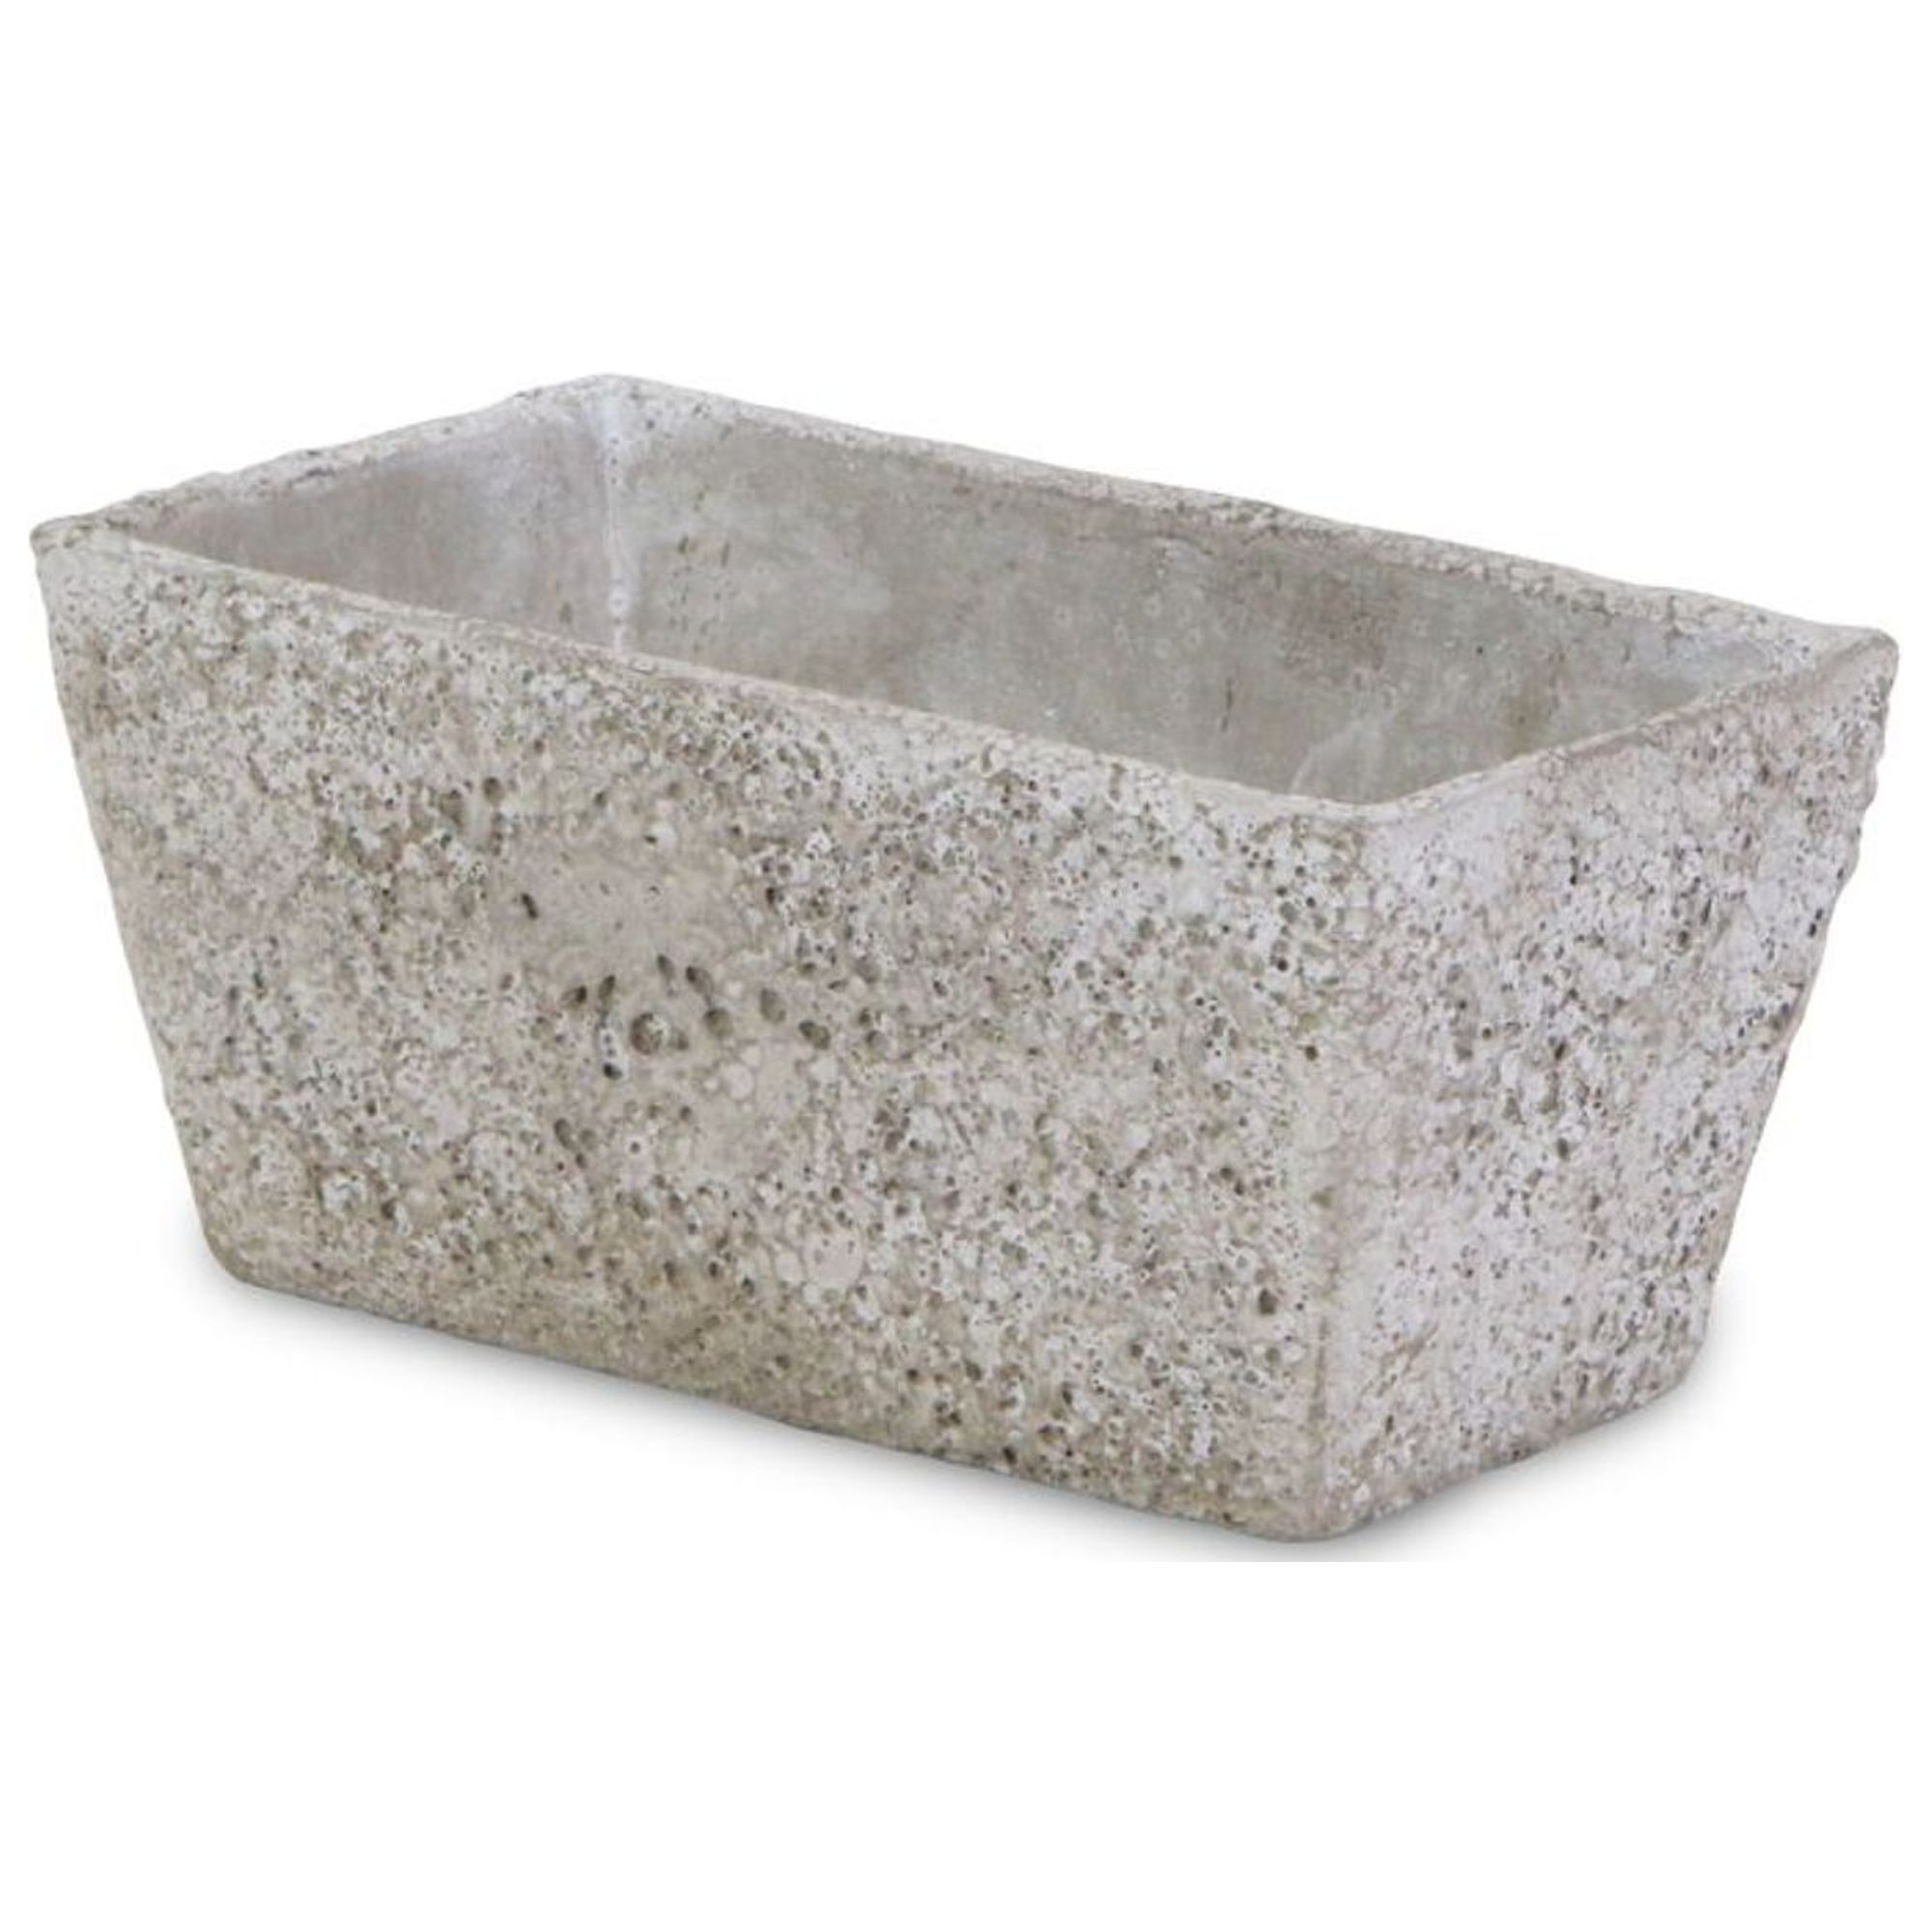 Contemporary Home Living 9.25" Gray Distressed Finish Rectangular Hollow Planter Pot - image 3 of 4